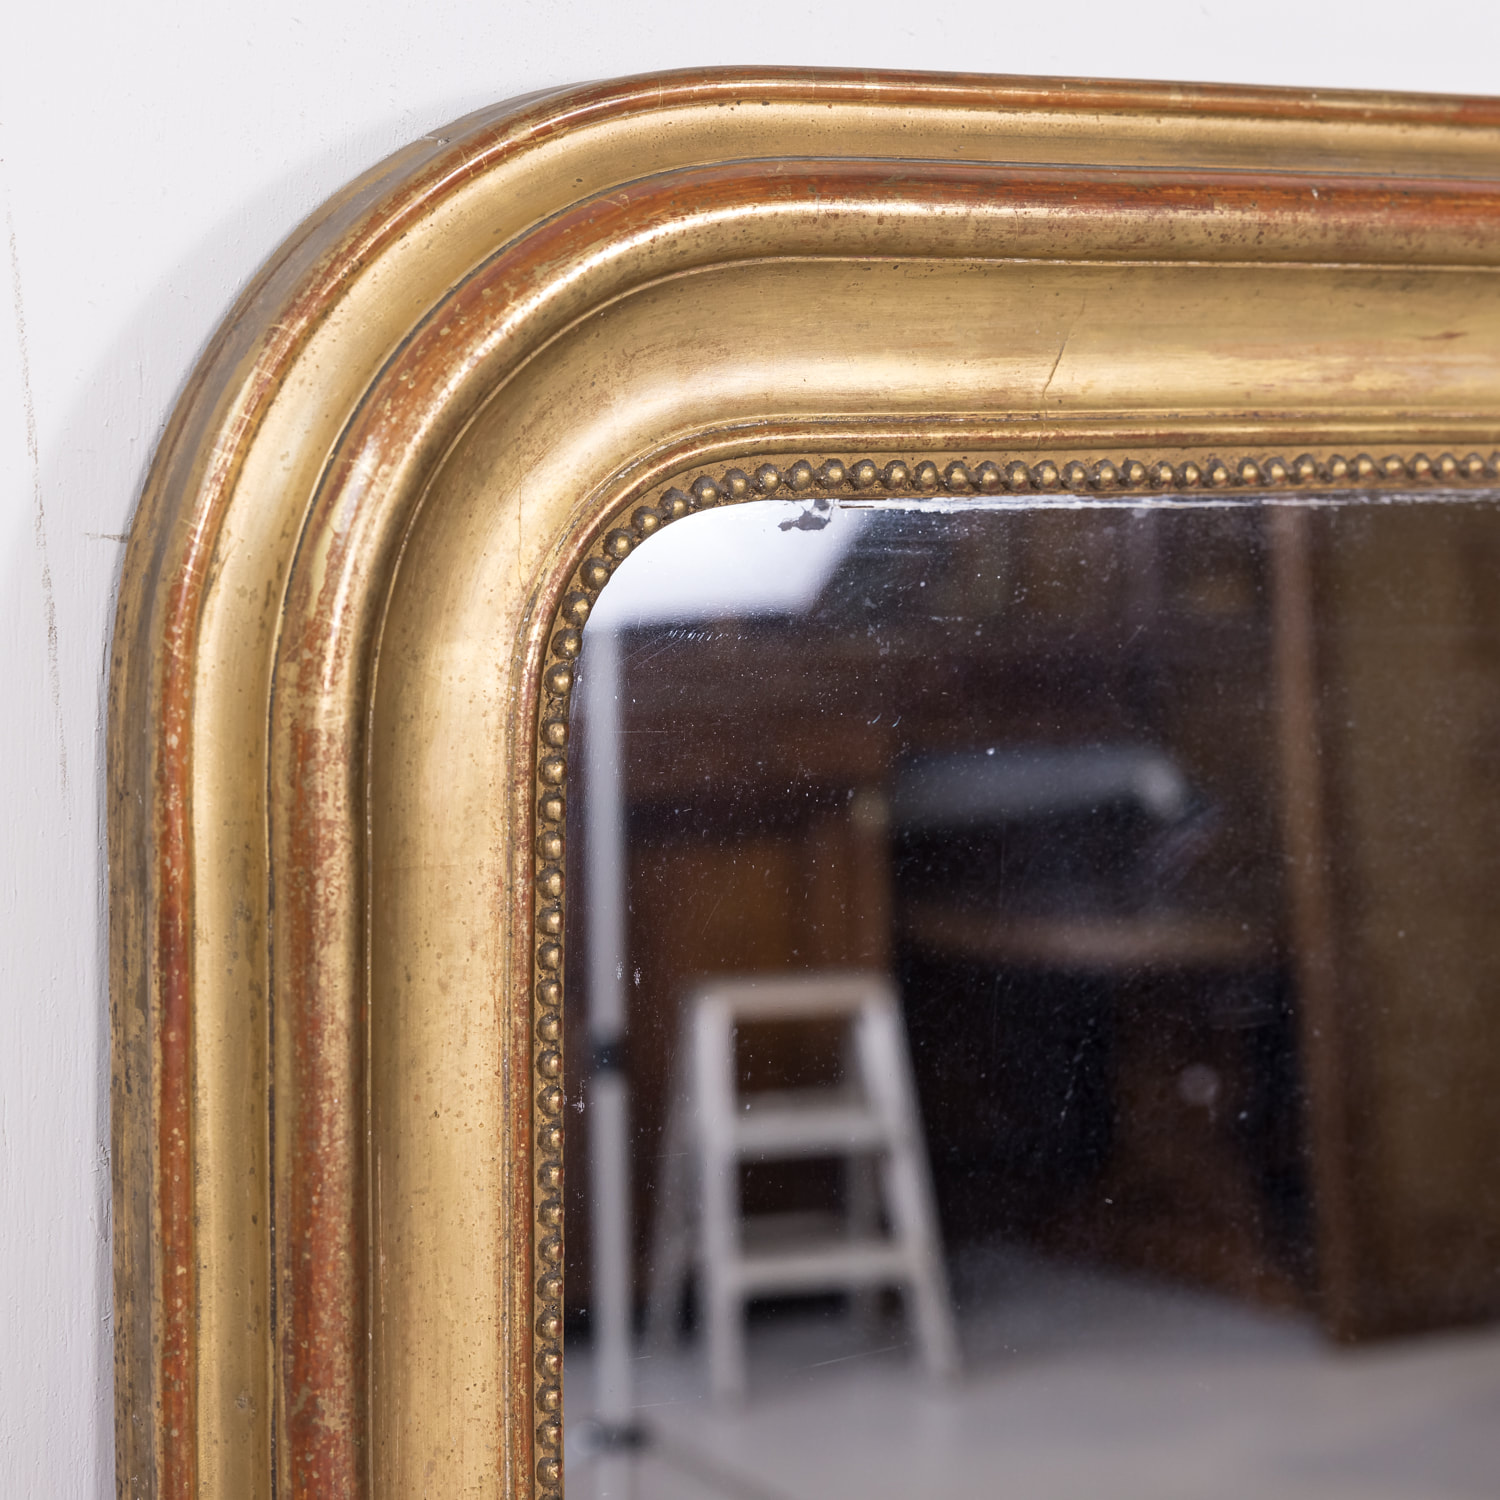 19th Century French Louis Philippe Style Golden Gilt Mirror